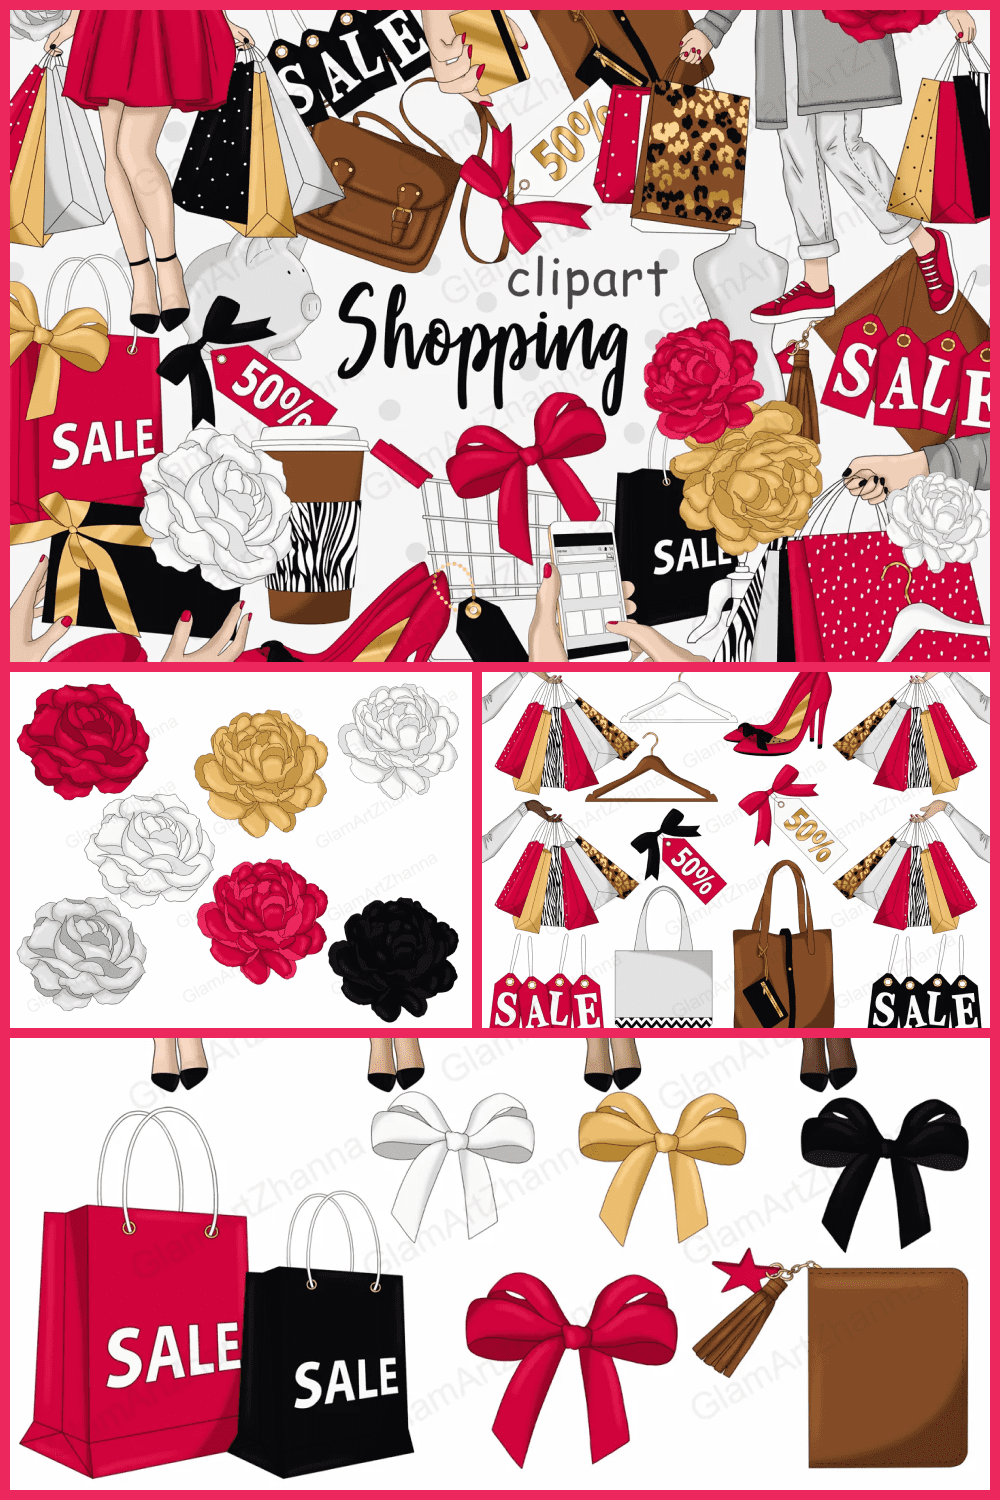 Shopping Clipart with Clothes, Packages.